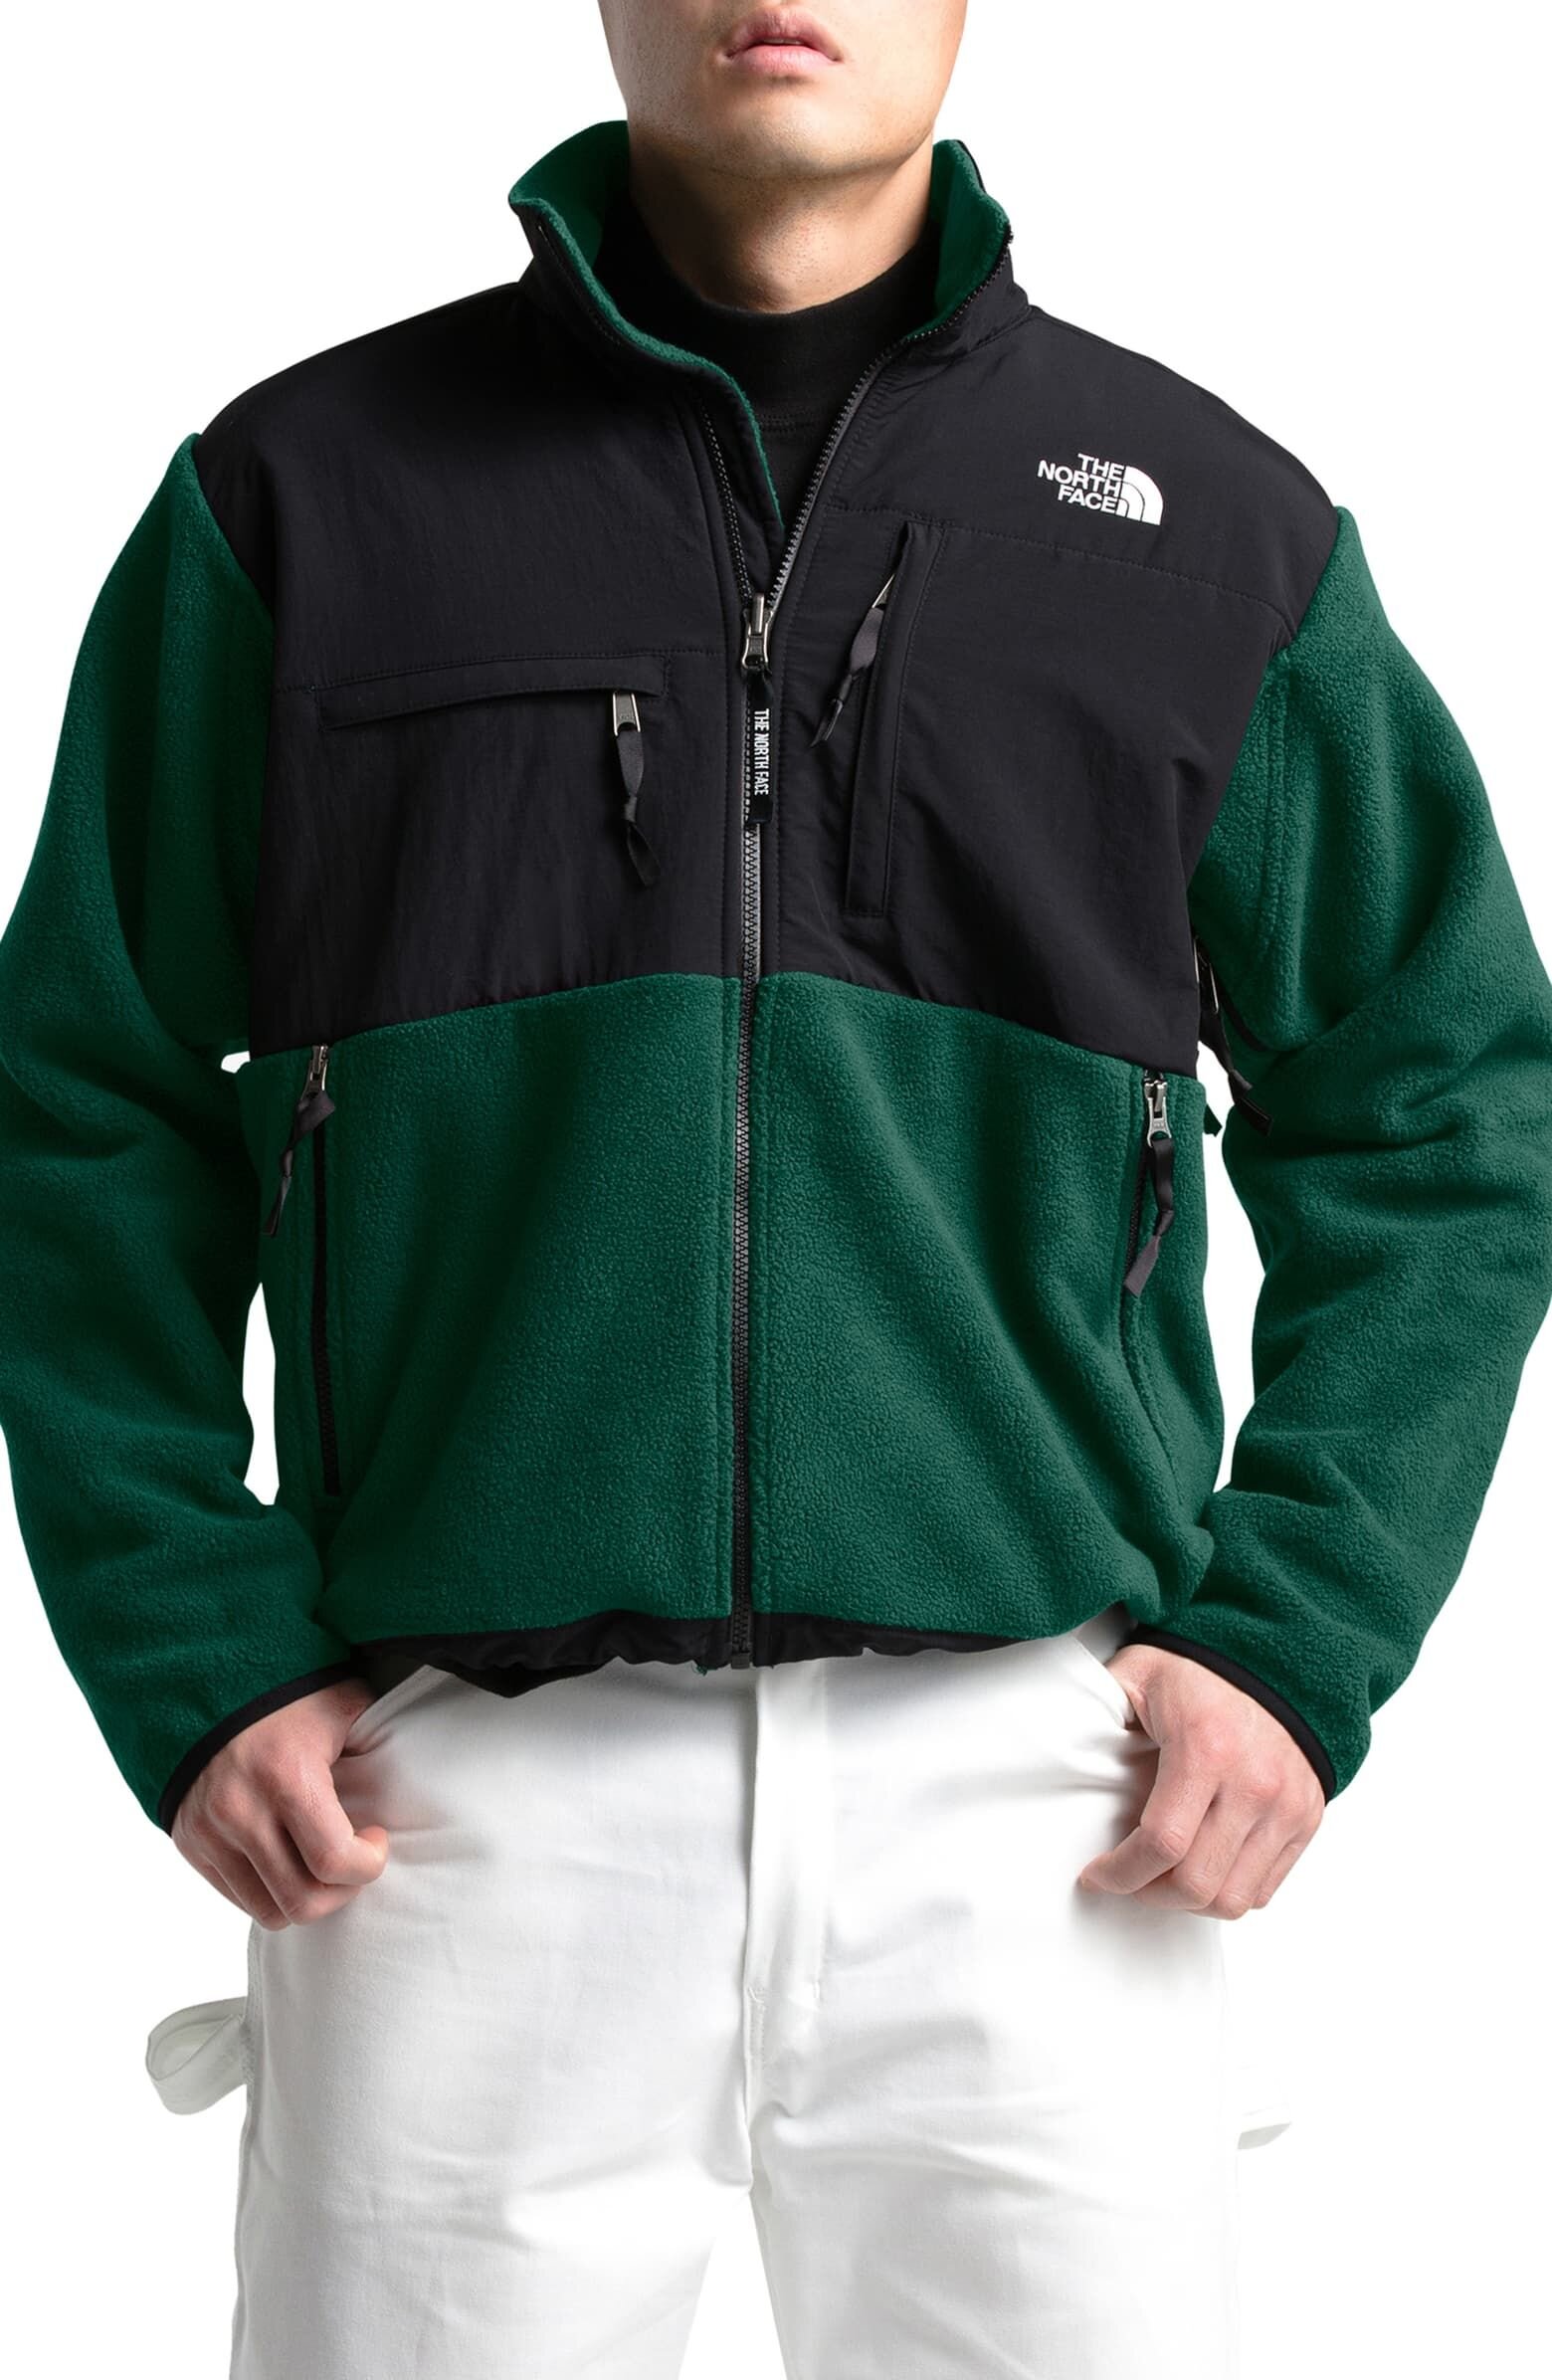 The North Face 1995 Retro Denali Recycled Fleece Jackets On Sale For 40